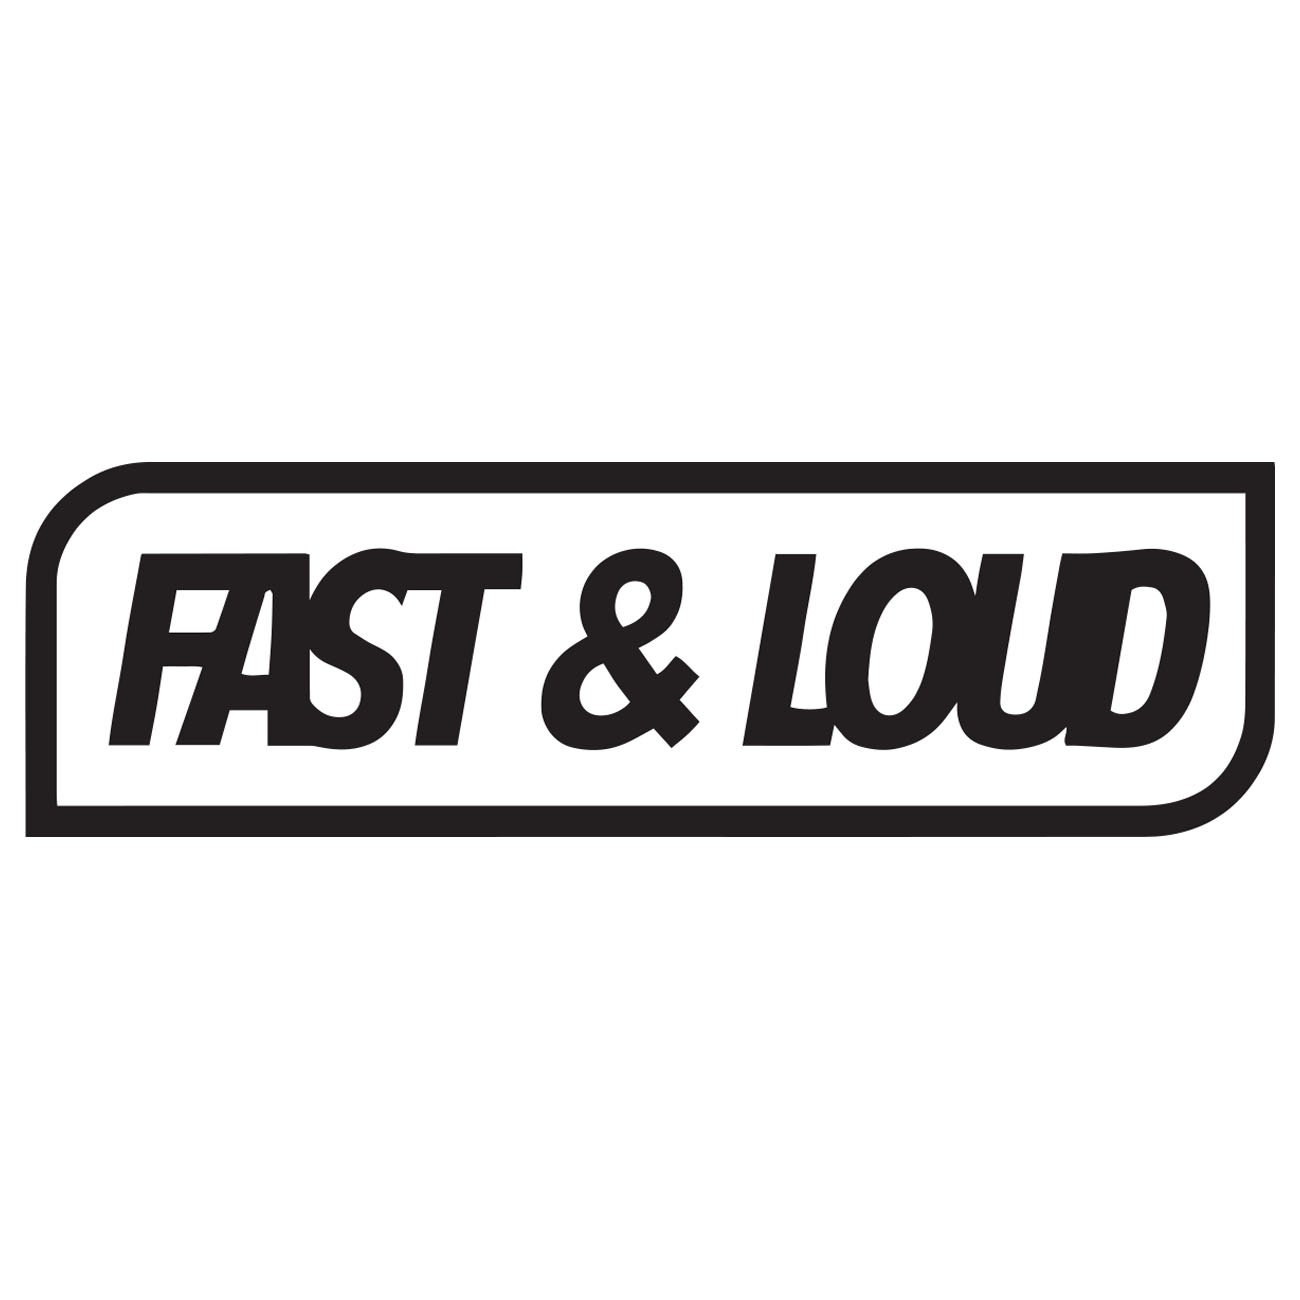 Fast and loud